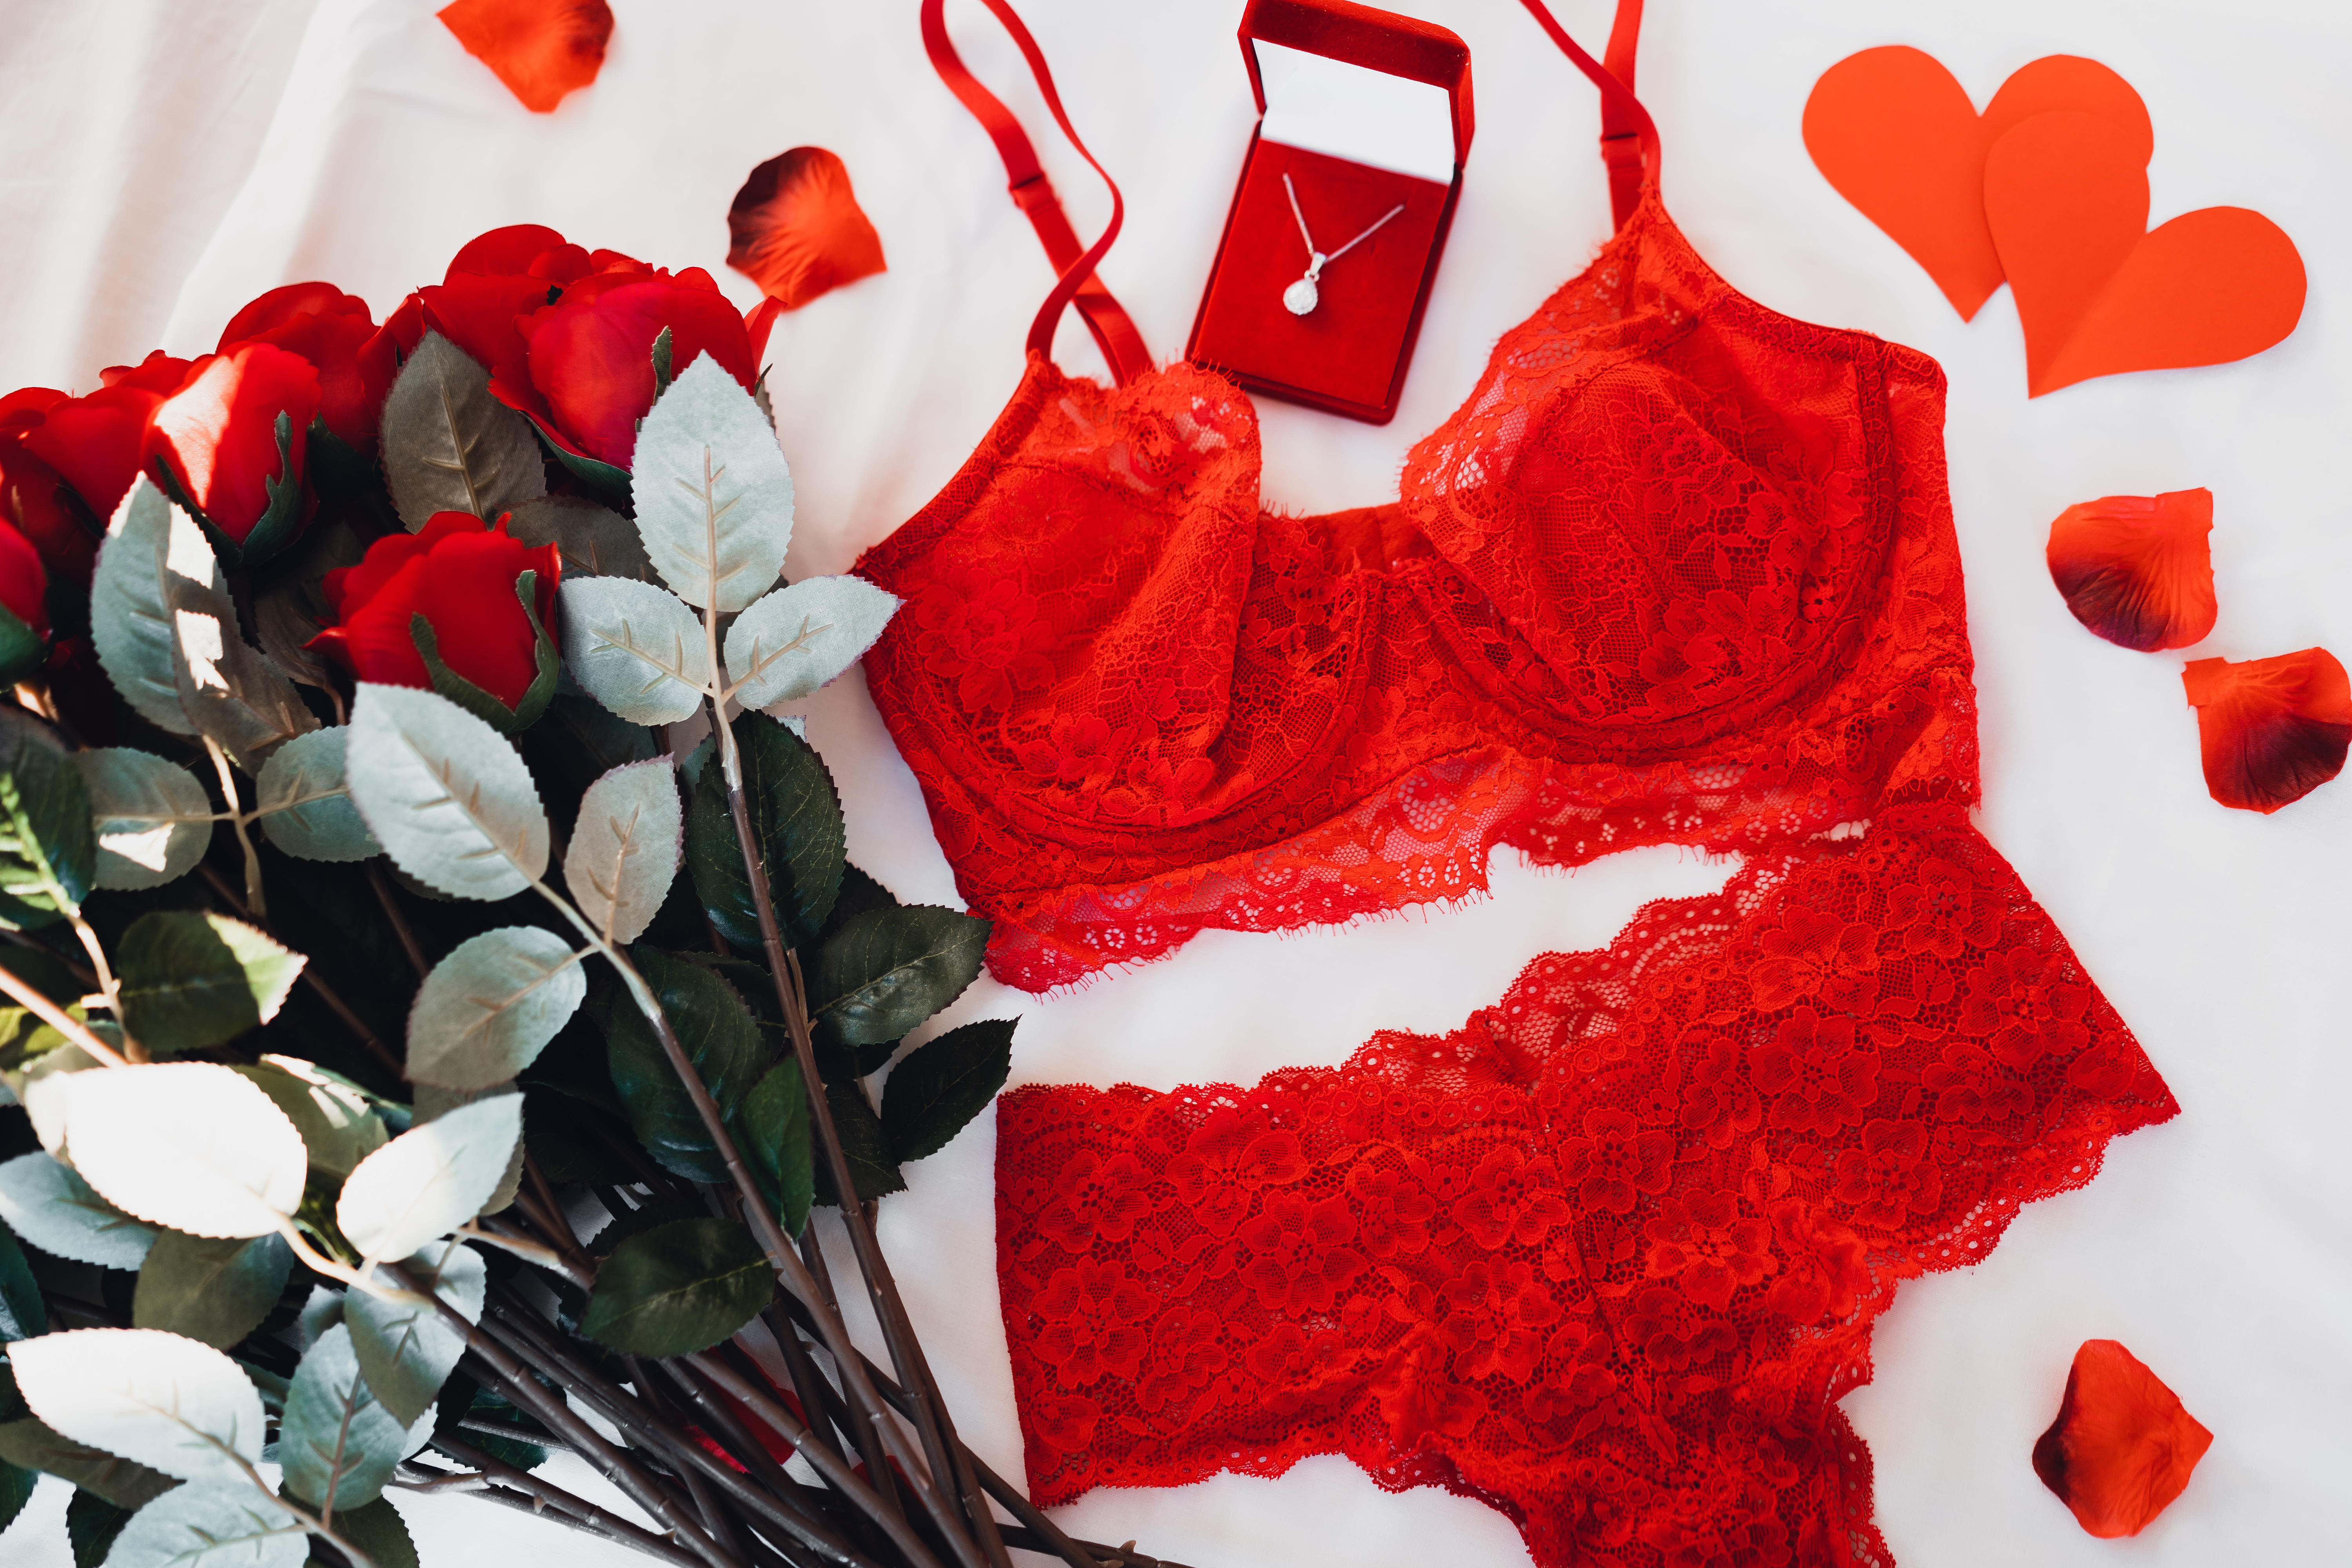 https://picjumbo.com/wp-content/uploads/red-sexy-lingerie-with-a-bouquet-of-roses-and-a-necklace-free-photo.jpg